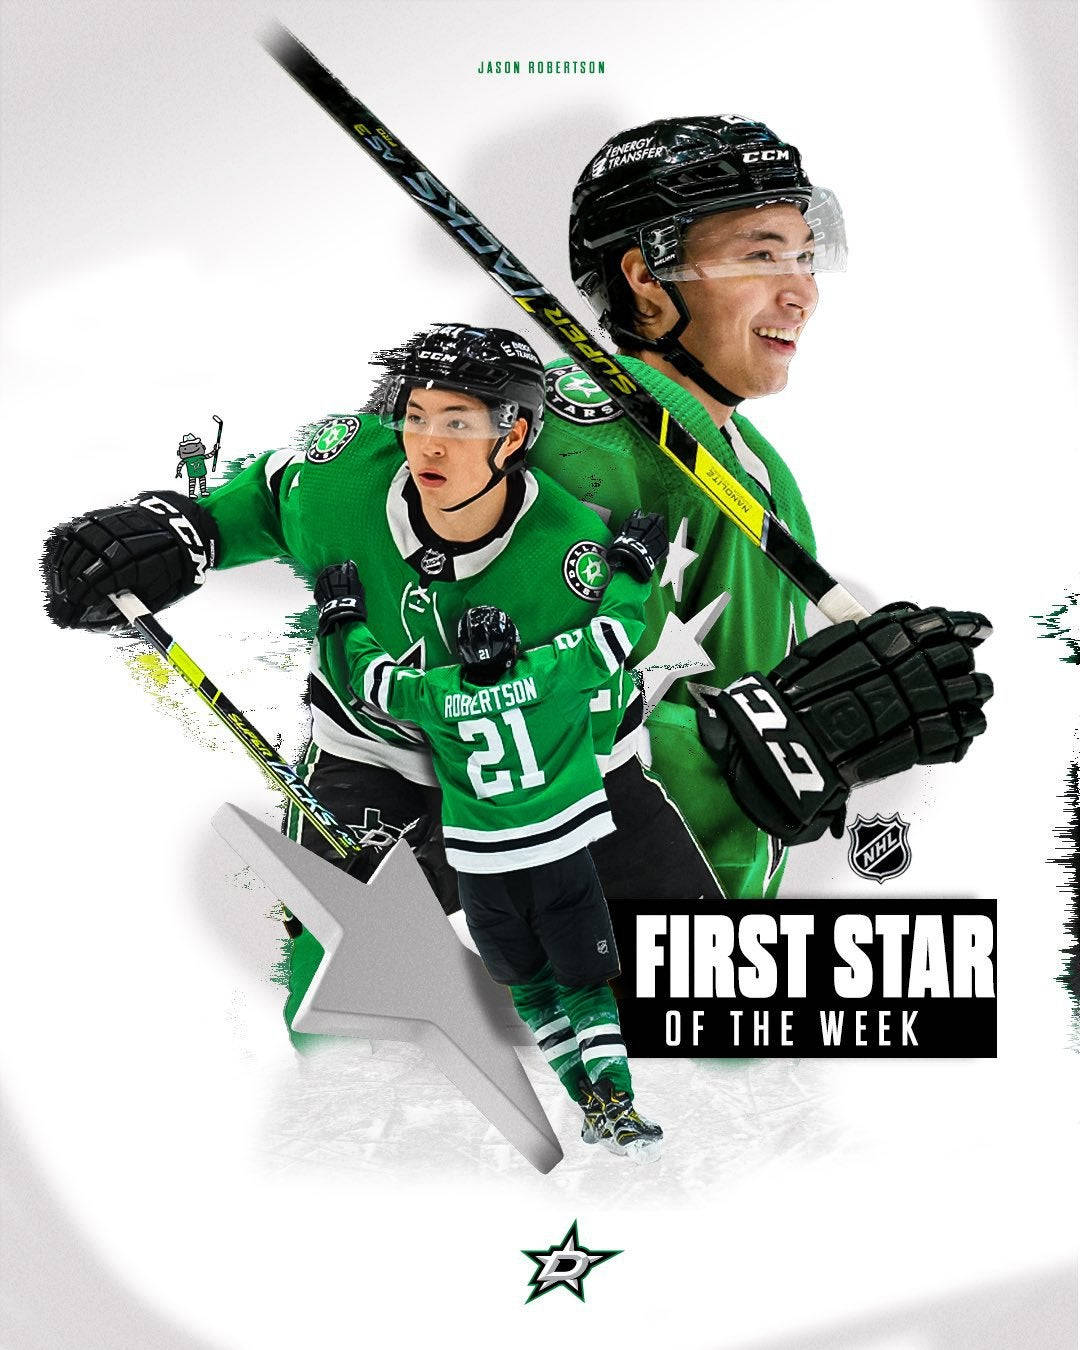 Jason Robertson celebrating as the first star of the week in Ice Hockey Wallpaper